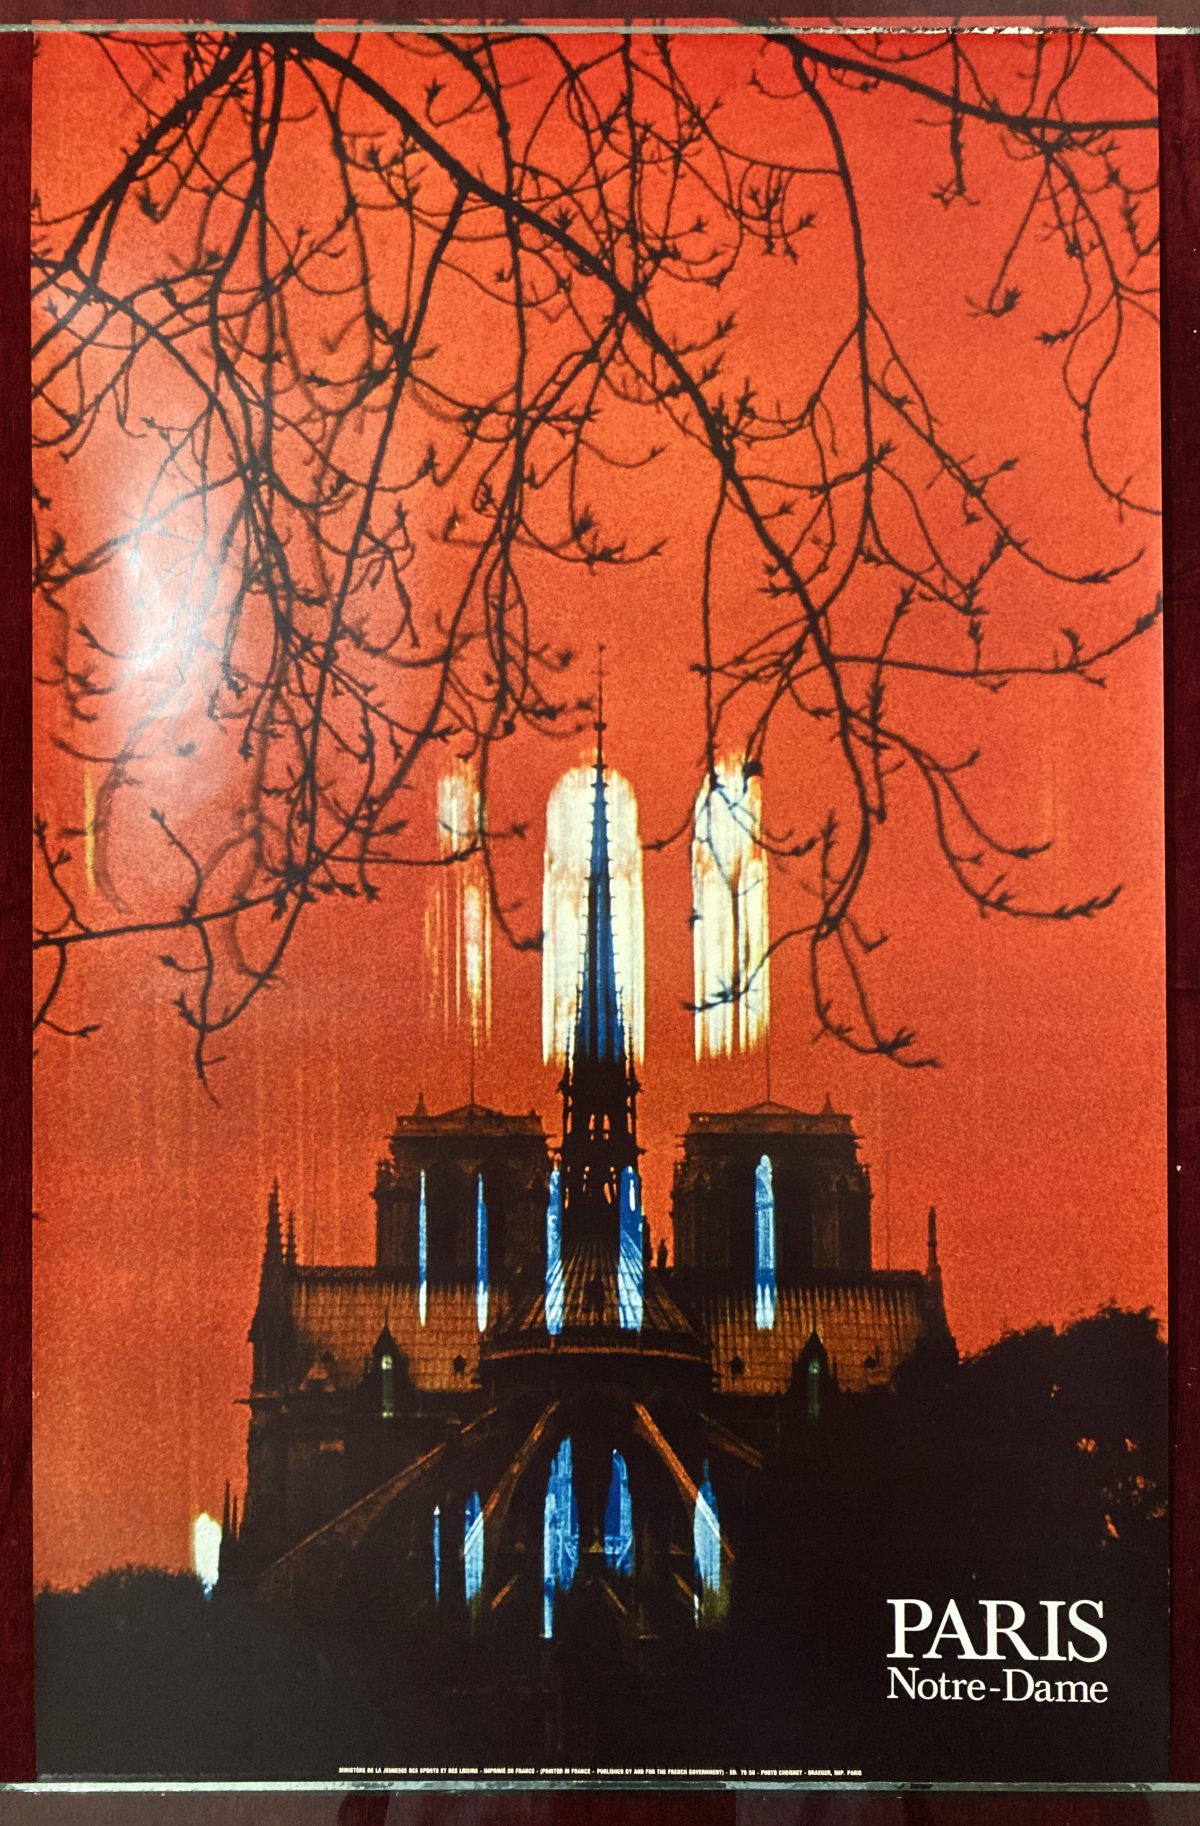 Poster of Notre Dame cathedral in Paris